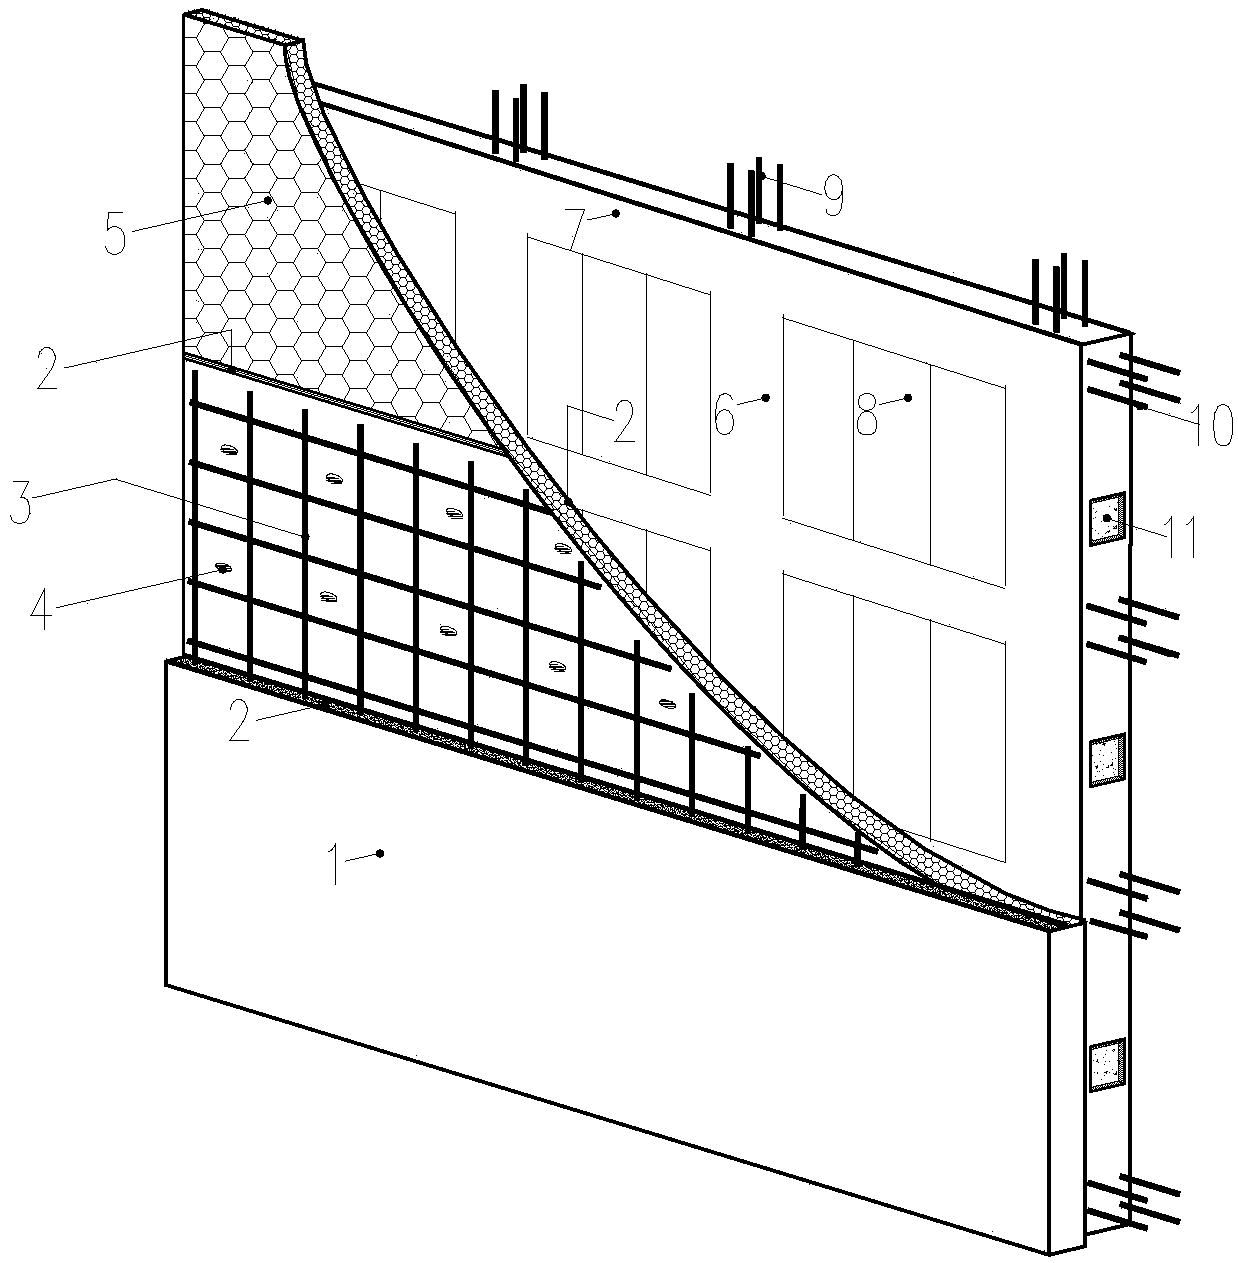 Fabricated bidirectional composite wall board provided with keyway-shaped grooves and construction method of fabricated bidirectional composite wall board